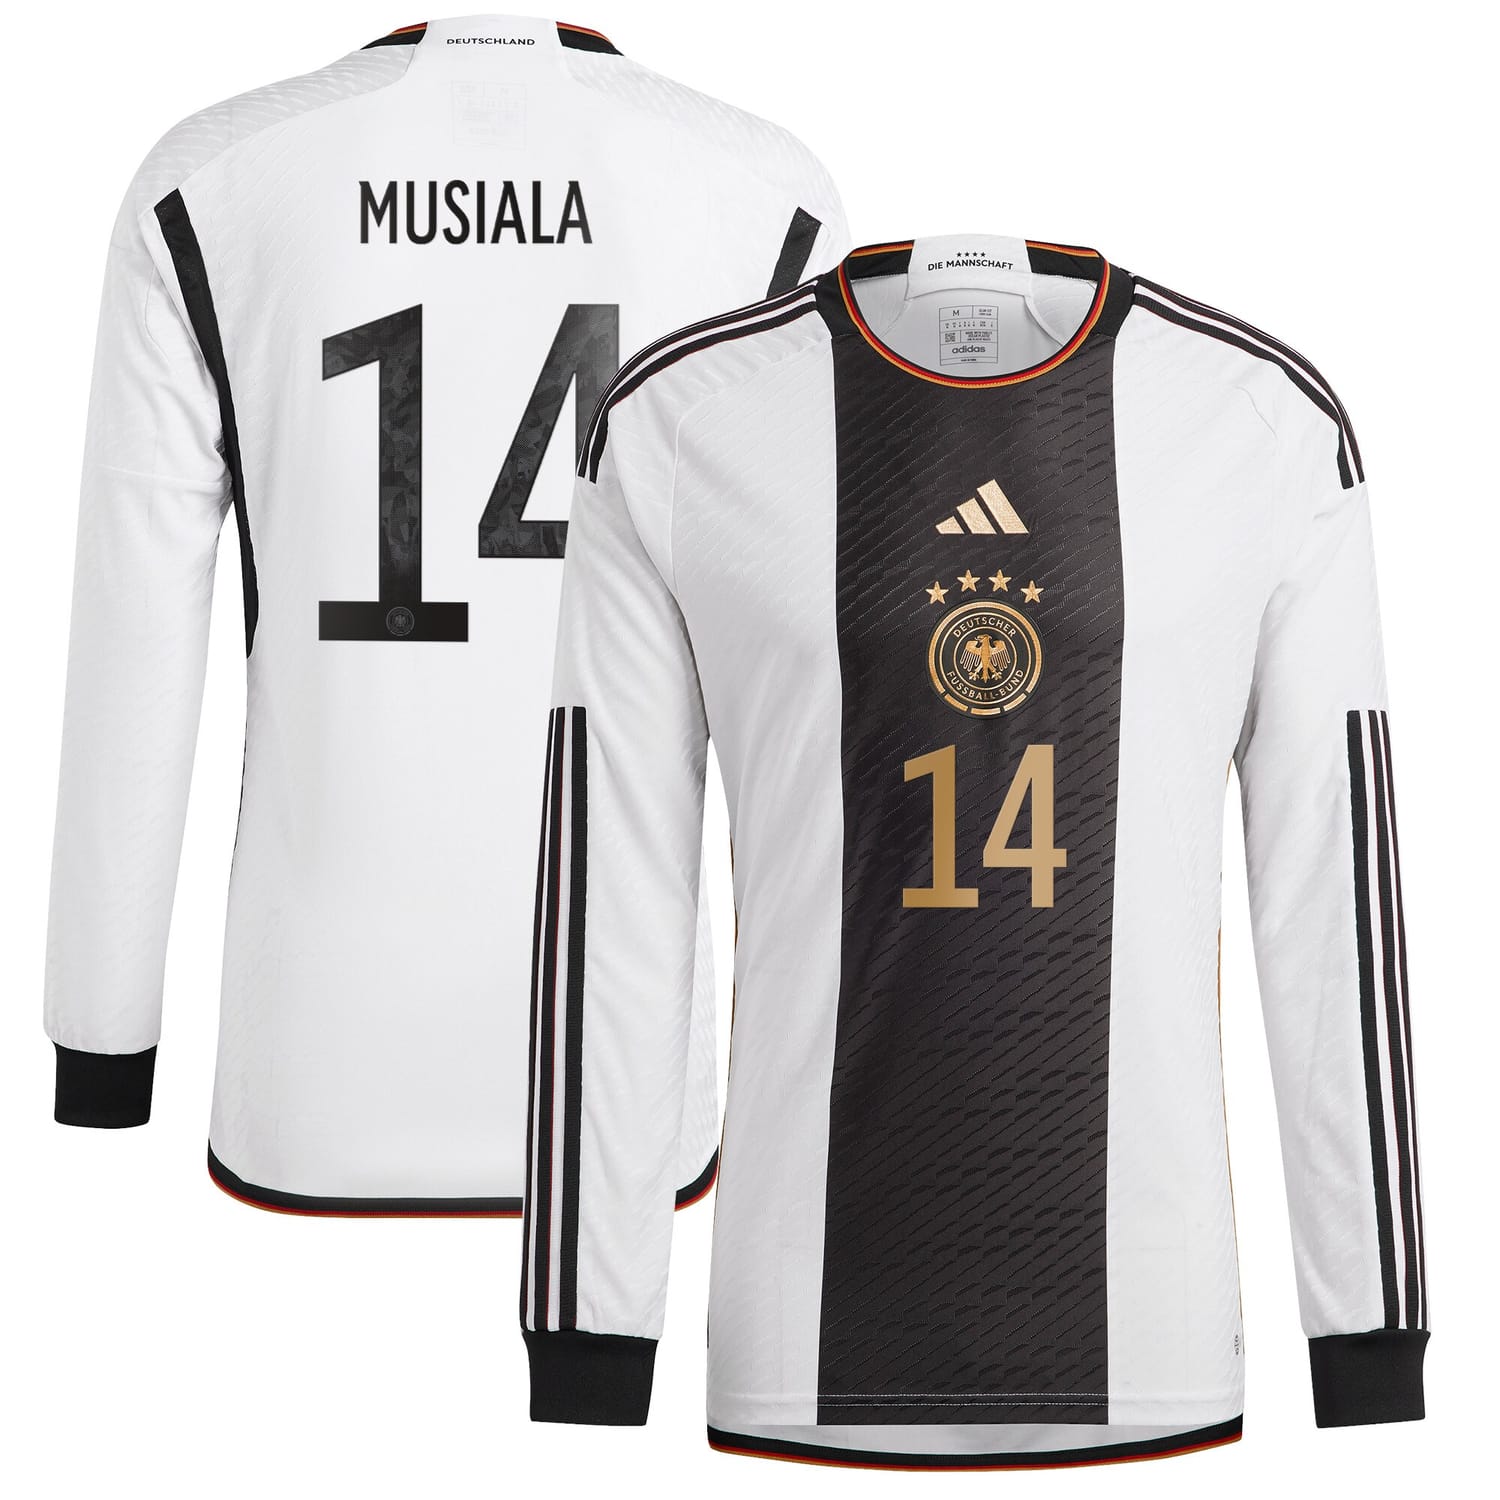 Germany National Team Home Authentic Jersey Shirt Long Sleeve player Jamal Musiala 14 printing for Men